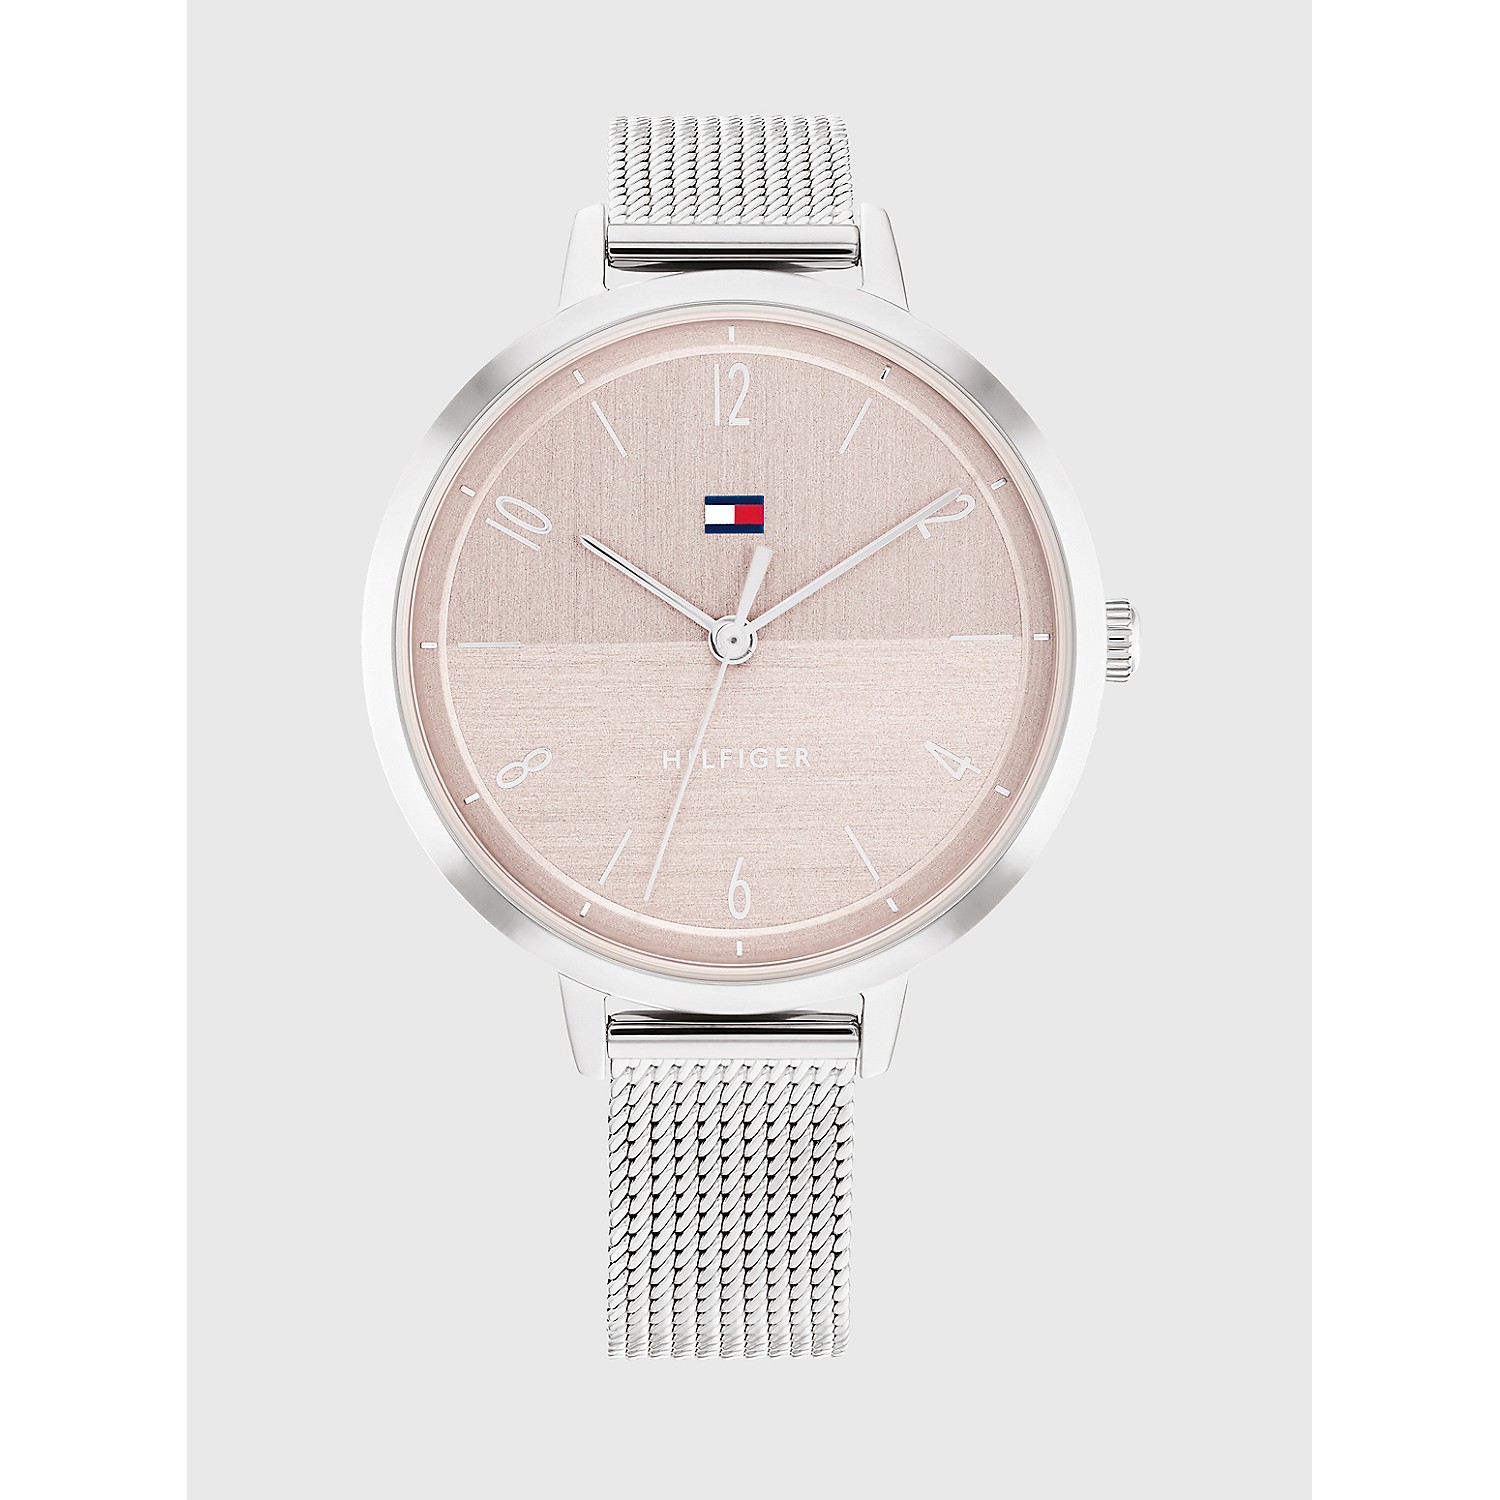 TOMMY HILFIGER Casual Watch with Stainless Steel Mesh Bracelet